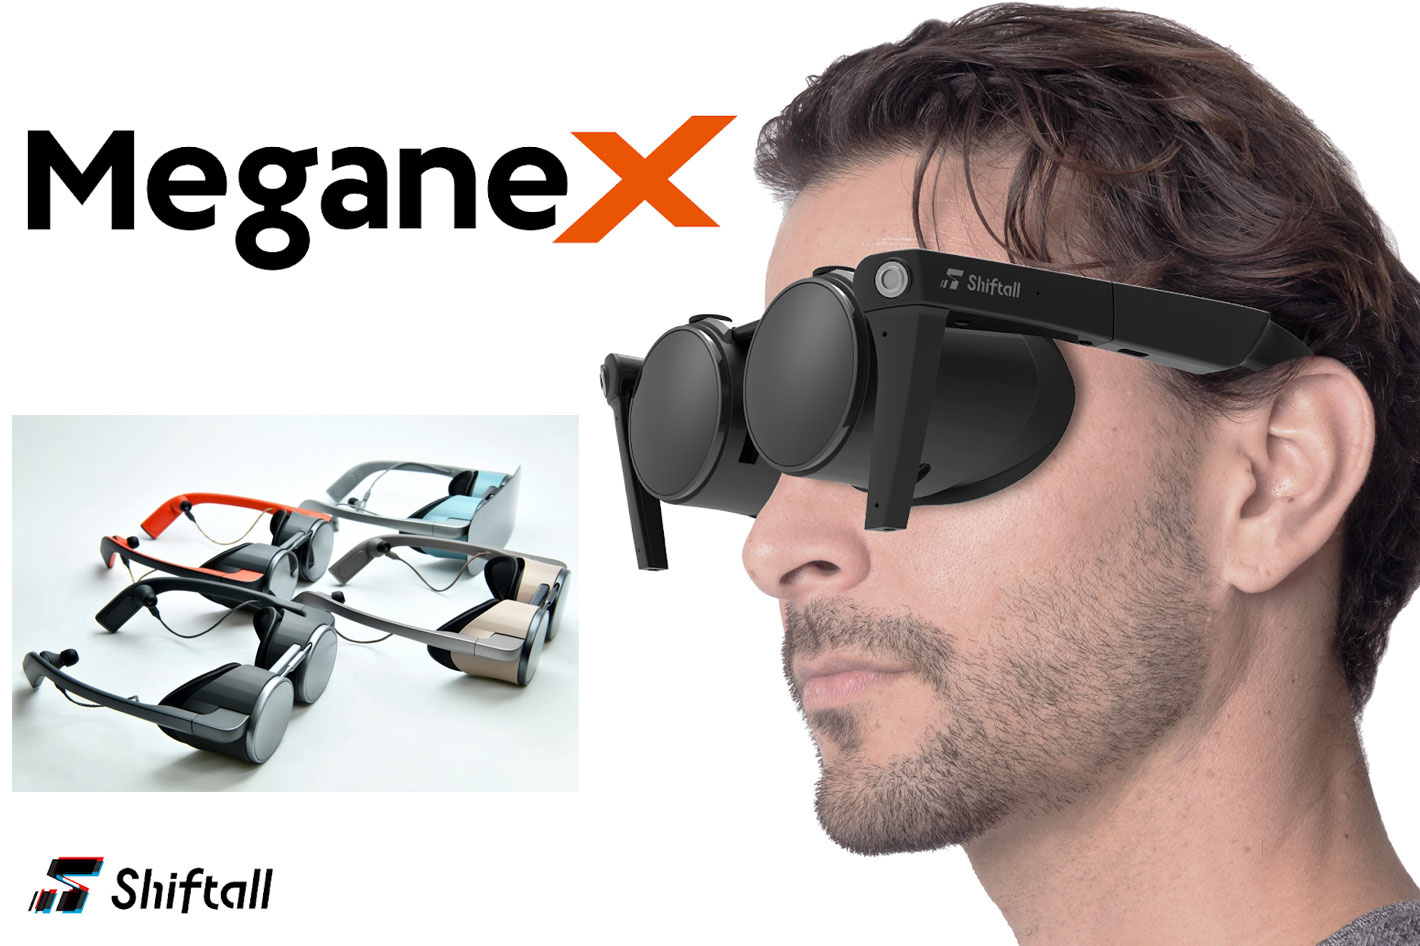 MeganeX: not one but two VR headsets with 5.2K OLED display